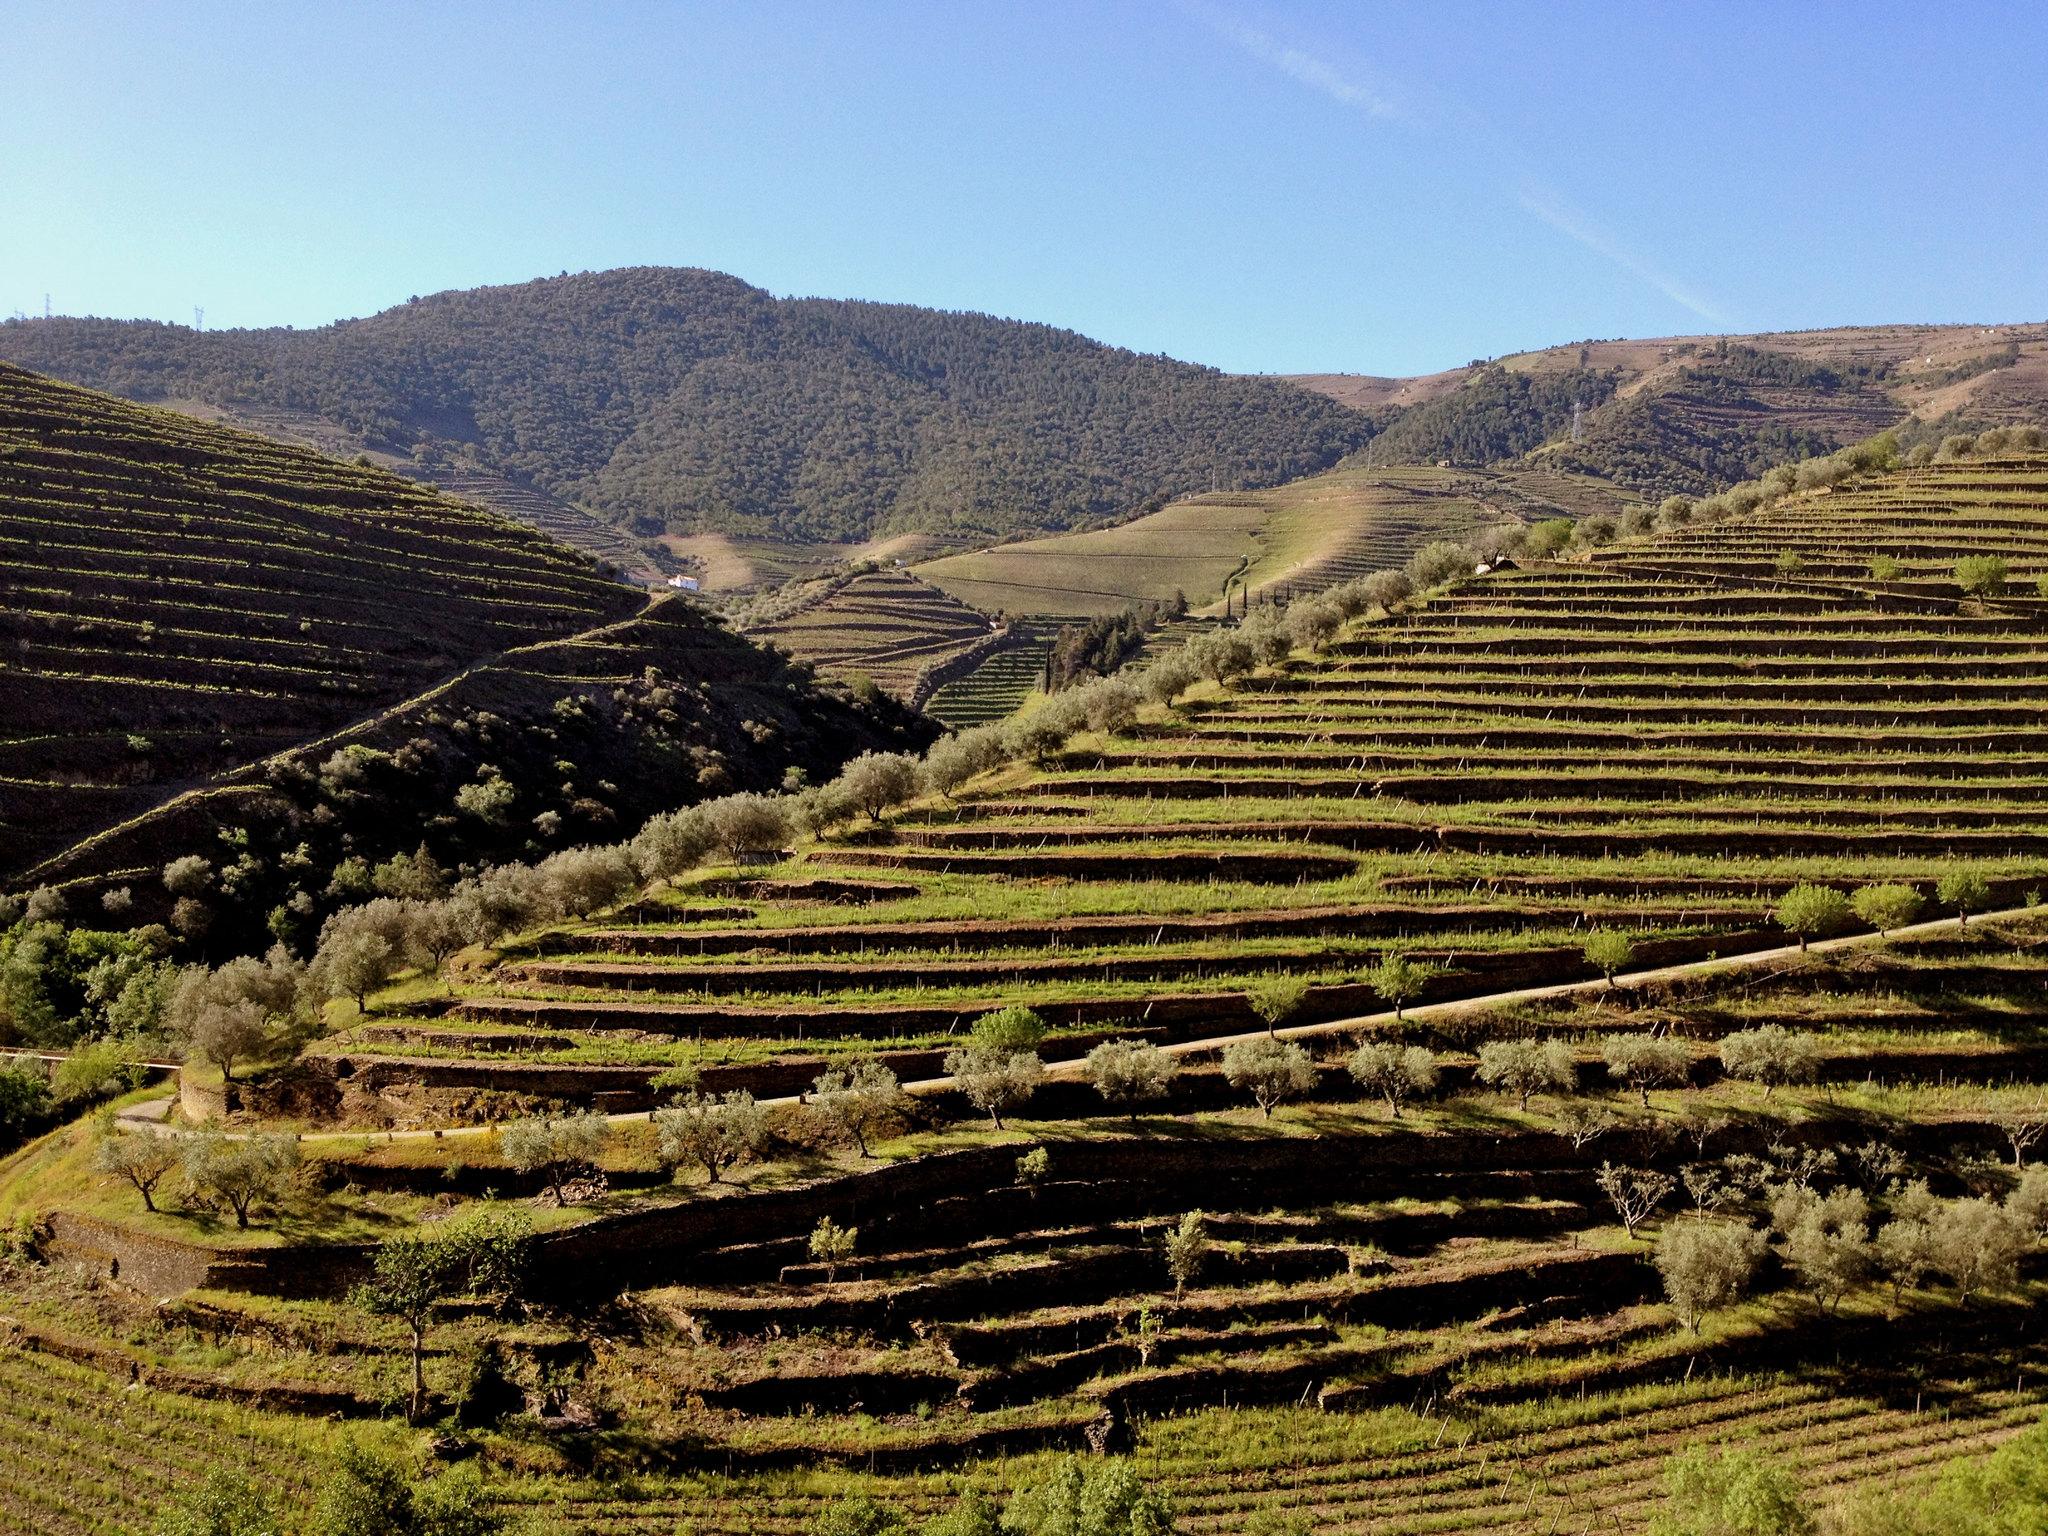 Douro Valley, Portugal, where the best road for driving enthusiasts cuts through